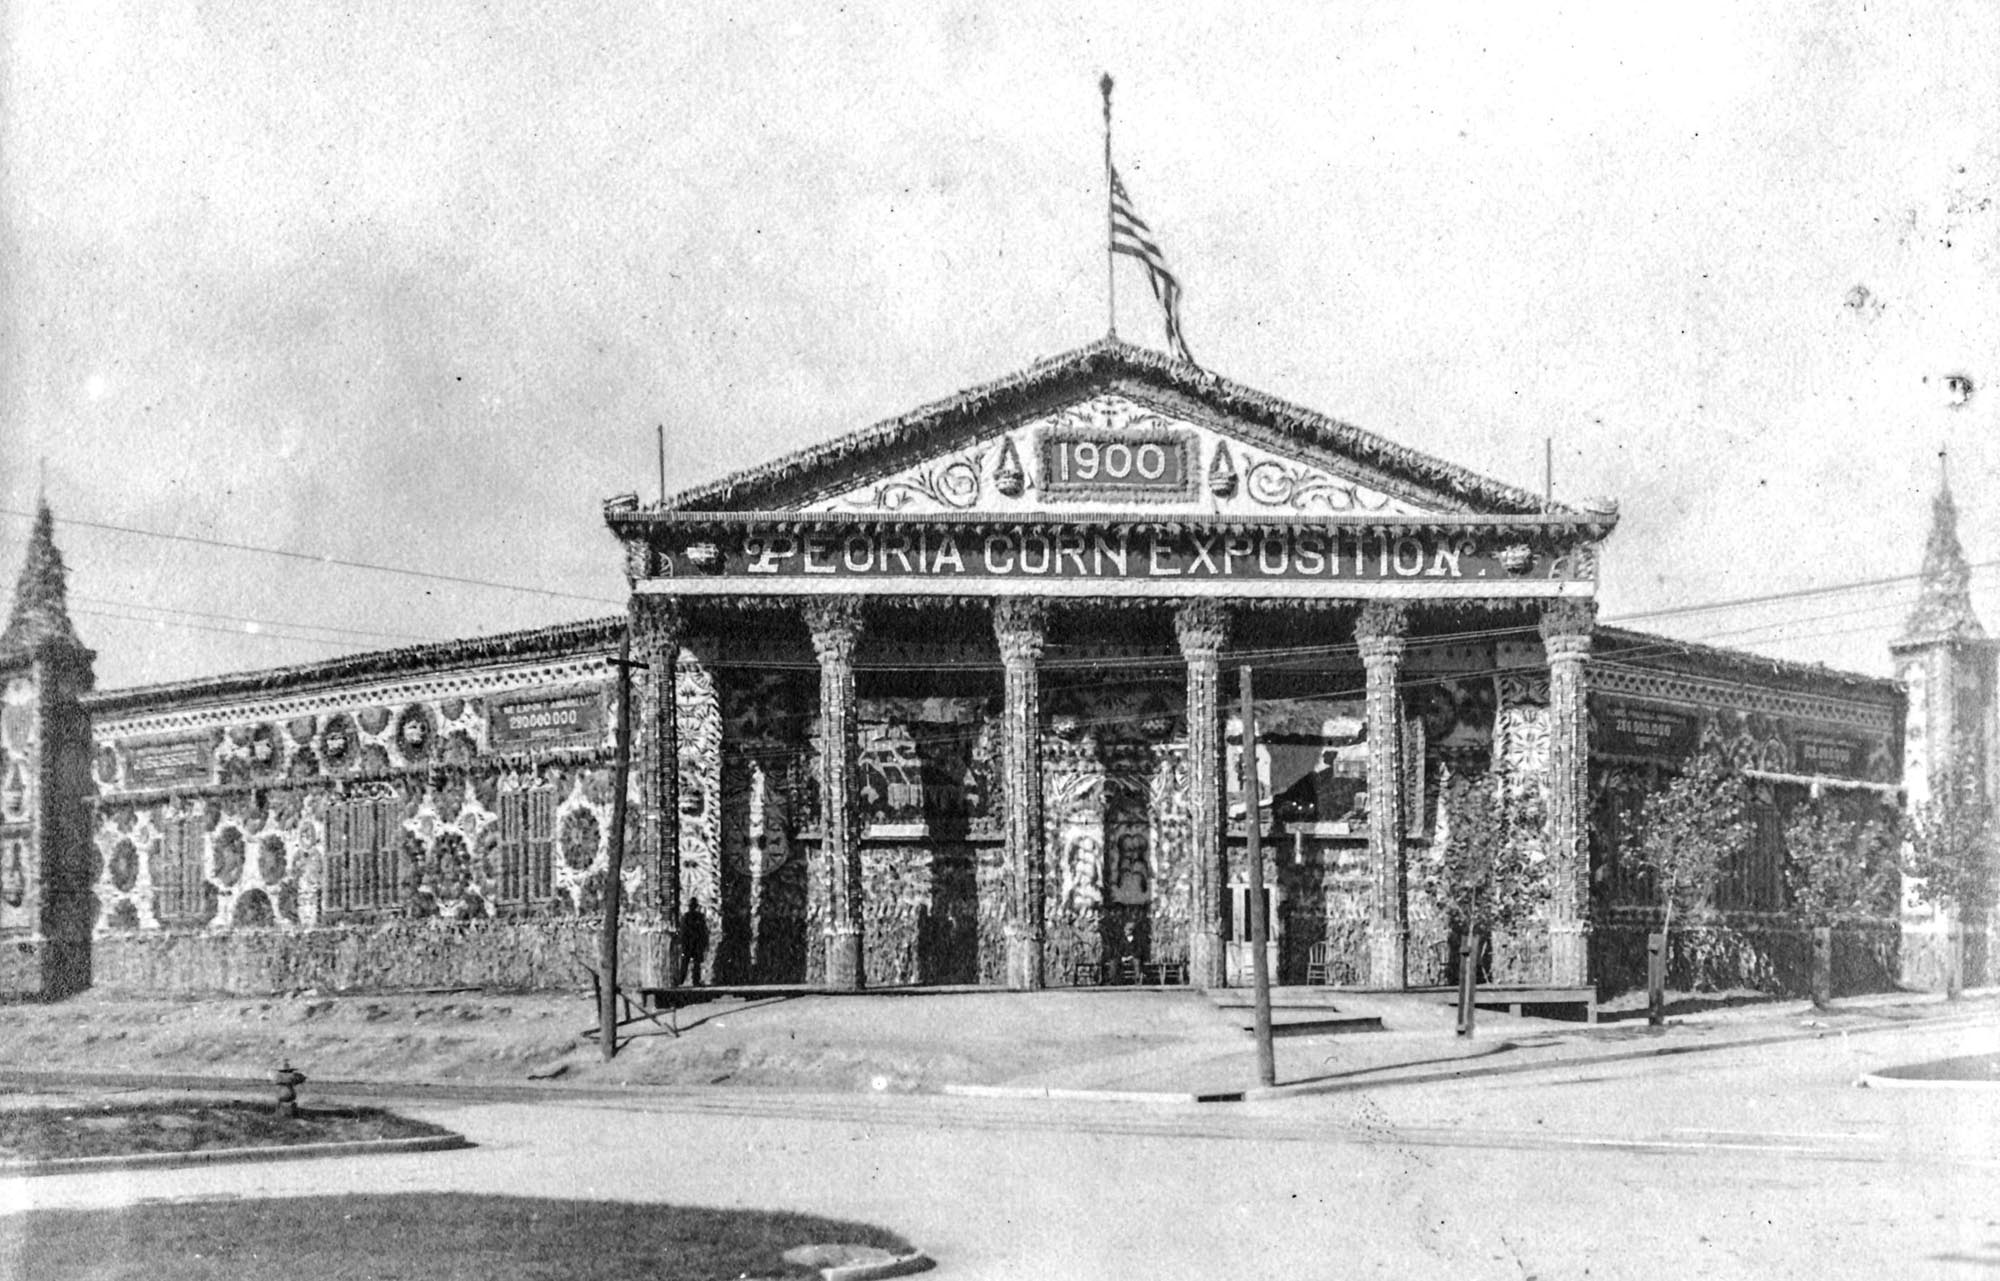 The Peoria Corn Exposition (or Corn Carnival) was a late summer attraction in Peoria from 1898 to 1902 with headquarters in this building on Globe Street between Main & Hamilton Streets. This wooden octagonal building which seated 7,000 was first built as a tabernacle for religious meetings. As the Corn Palace, the entire theme of decoration was corn, both inside and out. The week-long carnival included street shows with music or jugglers at nine different downtown corners, concerts by numerous bands, a governor's day with an industrial parade, bicycle races, a ladies day, husking matches, fireworks displays, premium awards at the Exposition Building and a Grand-Masked Parade and Carnival. The 1900 program lists the official song with music by Prof. Eugene Plowe and words by Peoria poet Edna Dean Proctor. "Blazon Columbia's Emblem, the Bounteous Golden Corn."

Original photos taken by William A. Gregory who lived on North Sheridan in Peoria. William worked for Frank D. Murray, a Peoria contractor (1881-1957) who built 100+ houses, including a good number on Frye Ave. William A. Gregory was an amateur photographer, picking up the hobby early on, taking thousands of architectural and event pictures of Peoria.